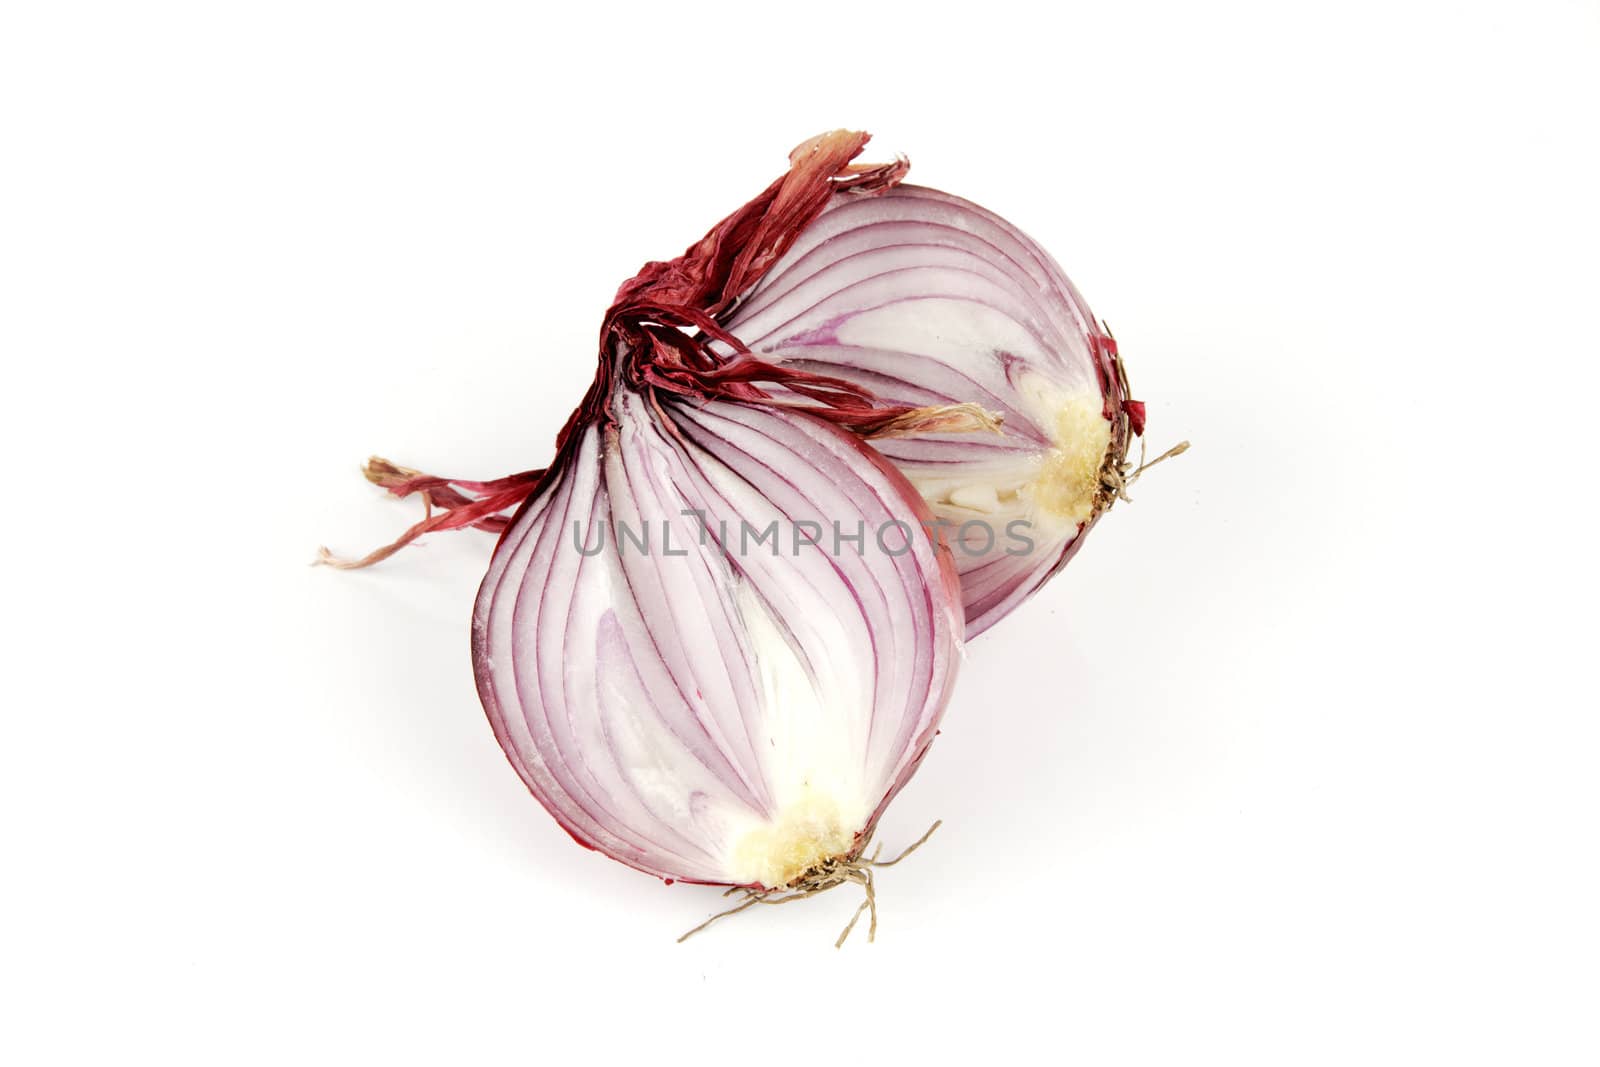 Raw red onion cut in half on a reflective white background